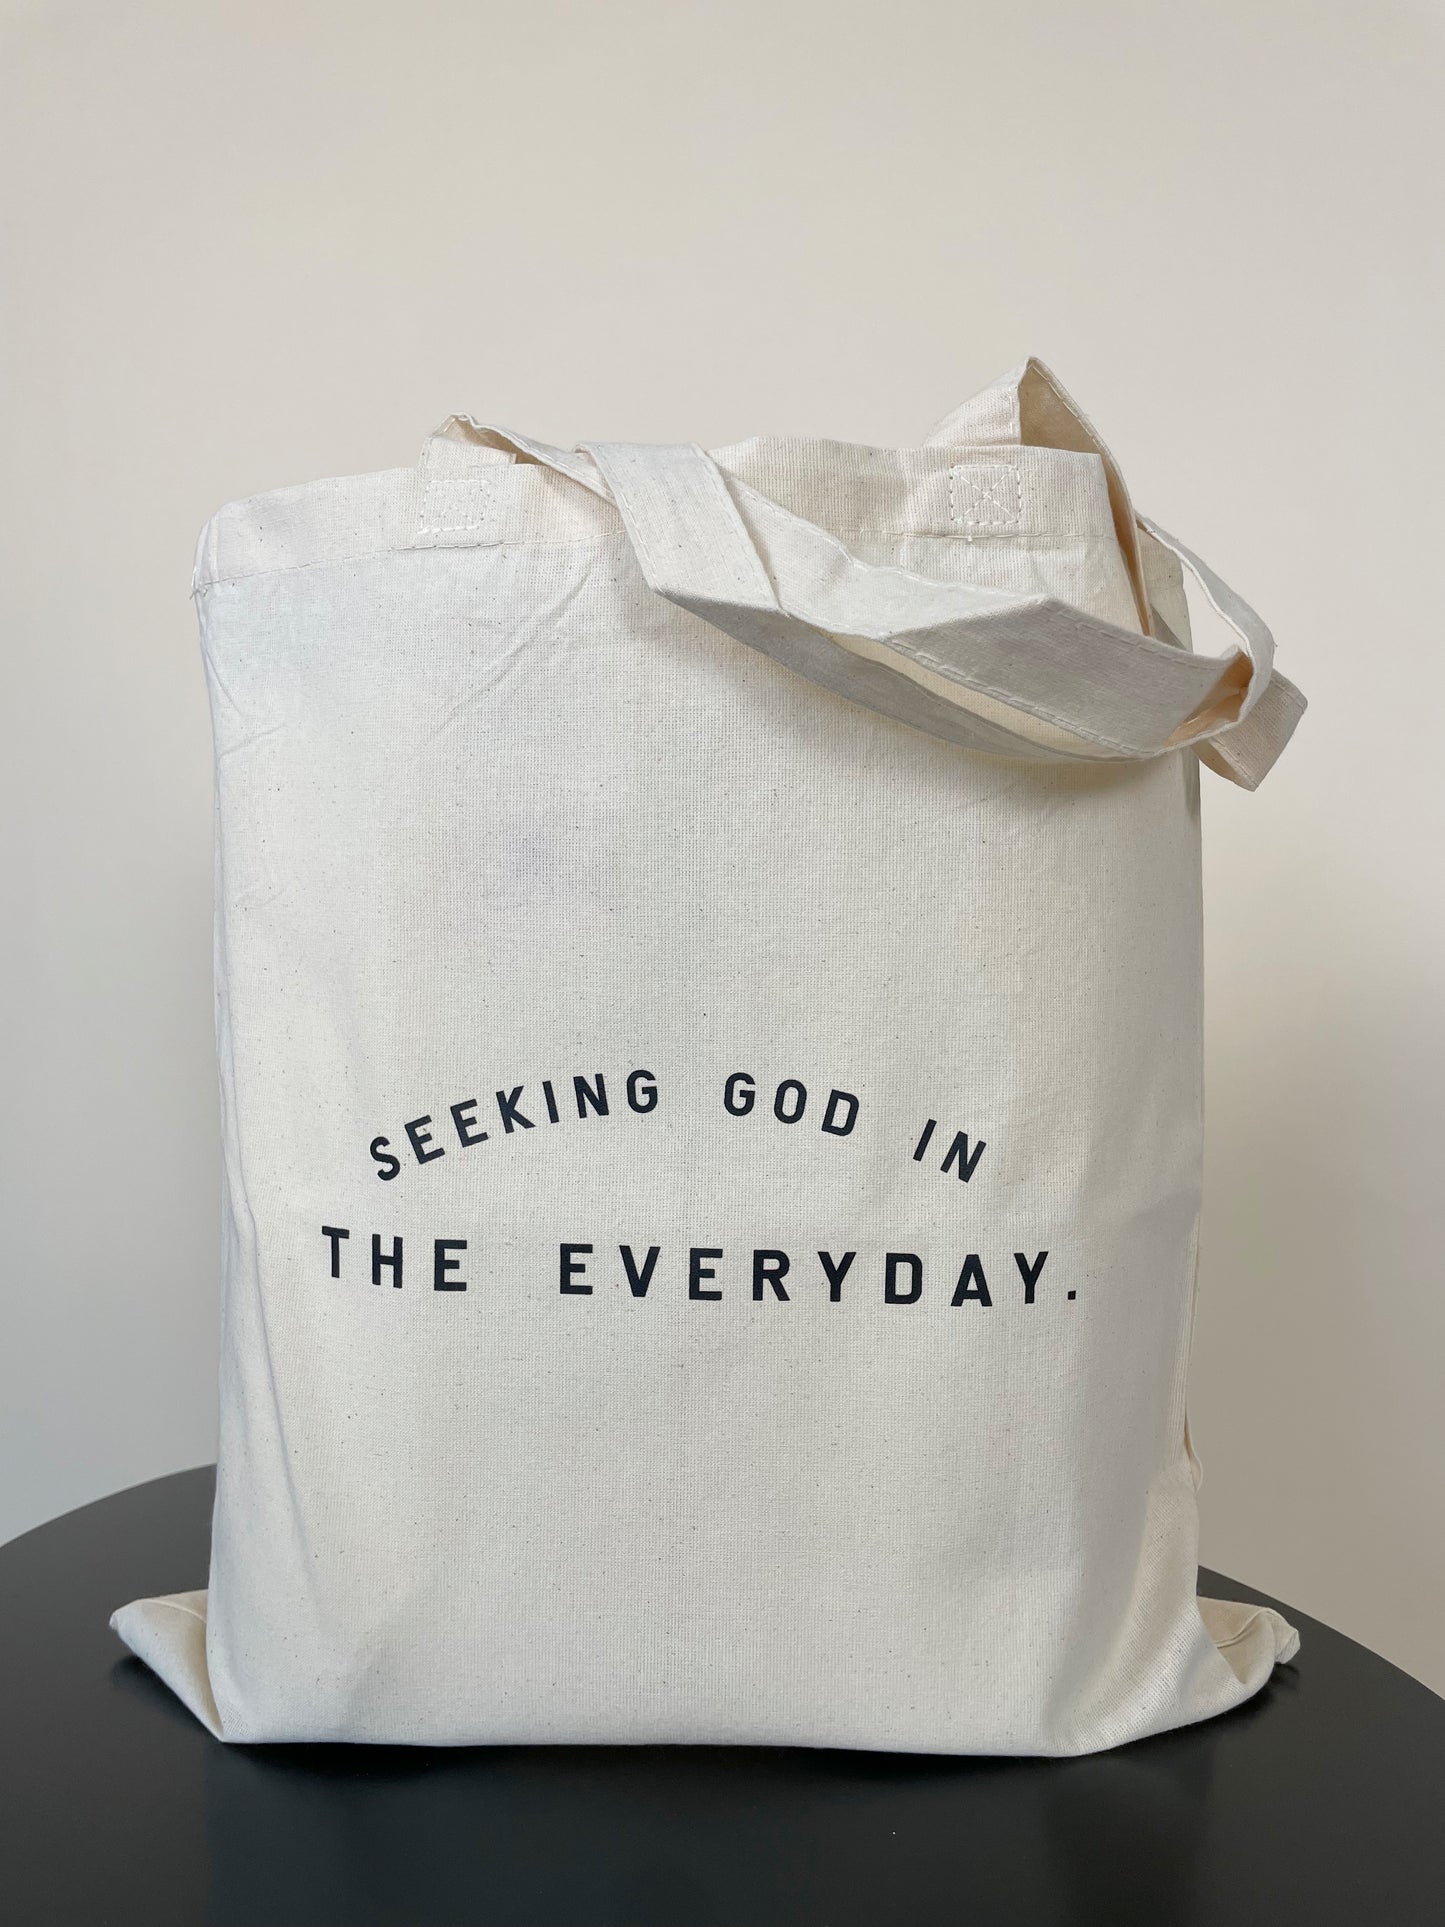 Seeking God in the Everyday - Market Tote Bag